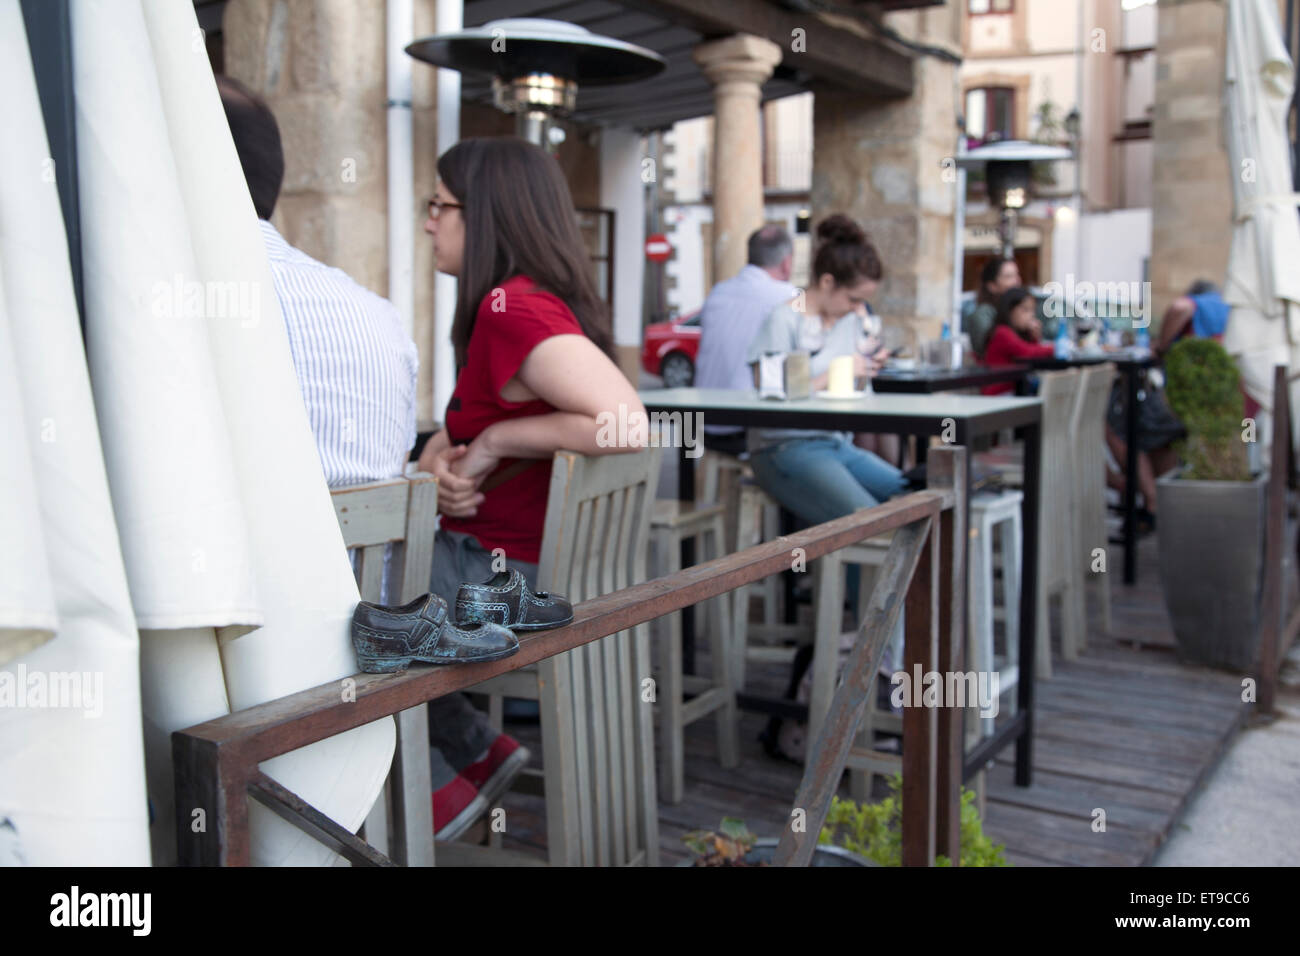 Misa del 12 Restaurant Bar and Cafe; Ubeda, Andalusia; Spain Stock Photo